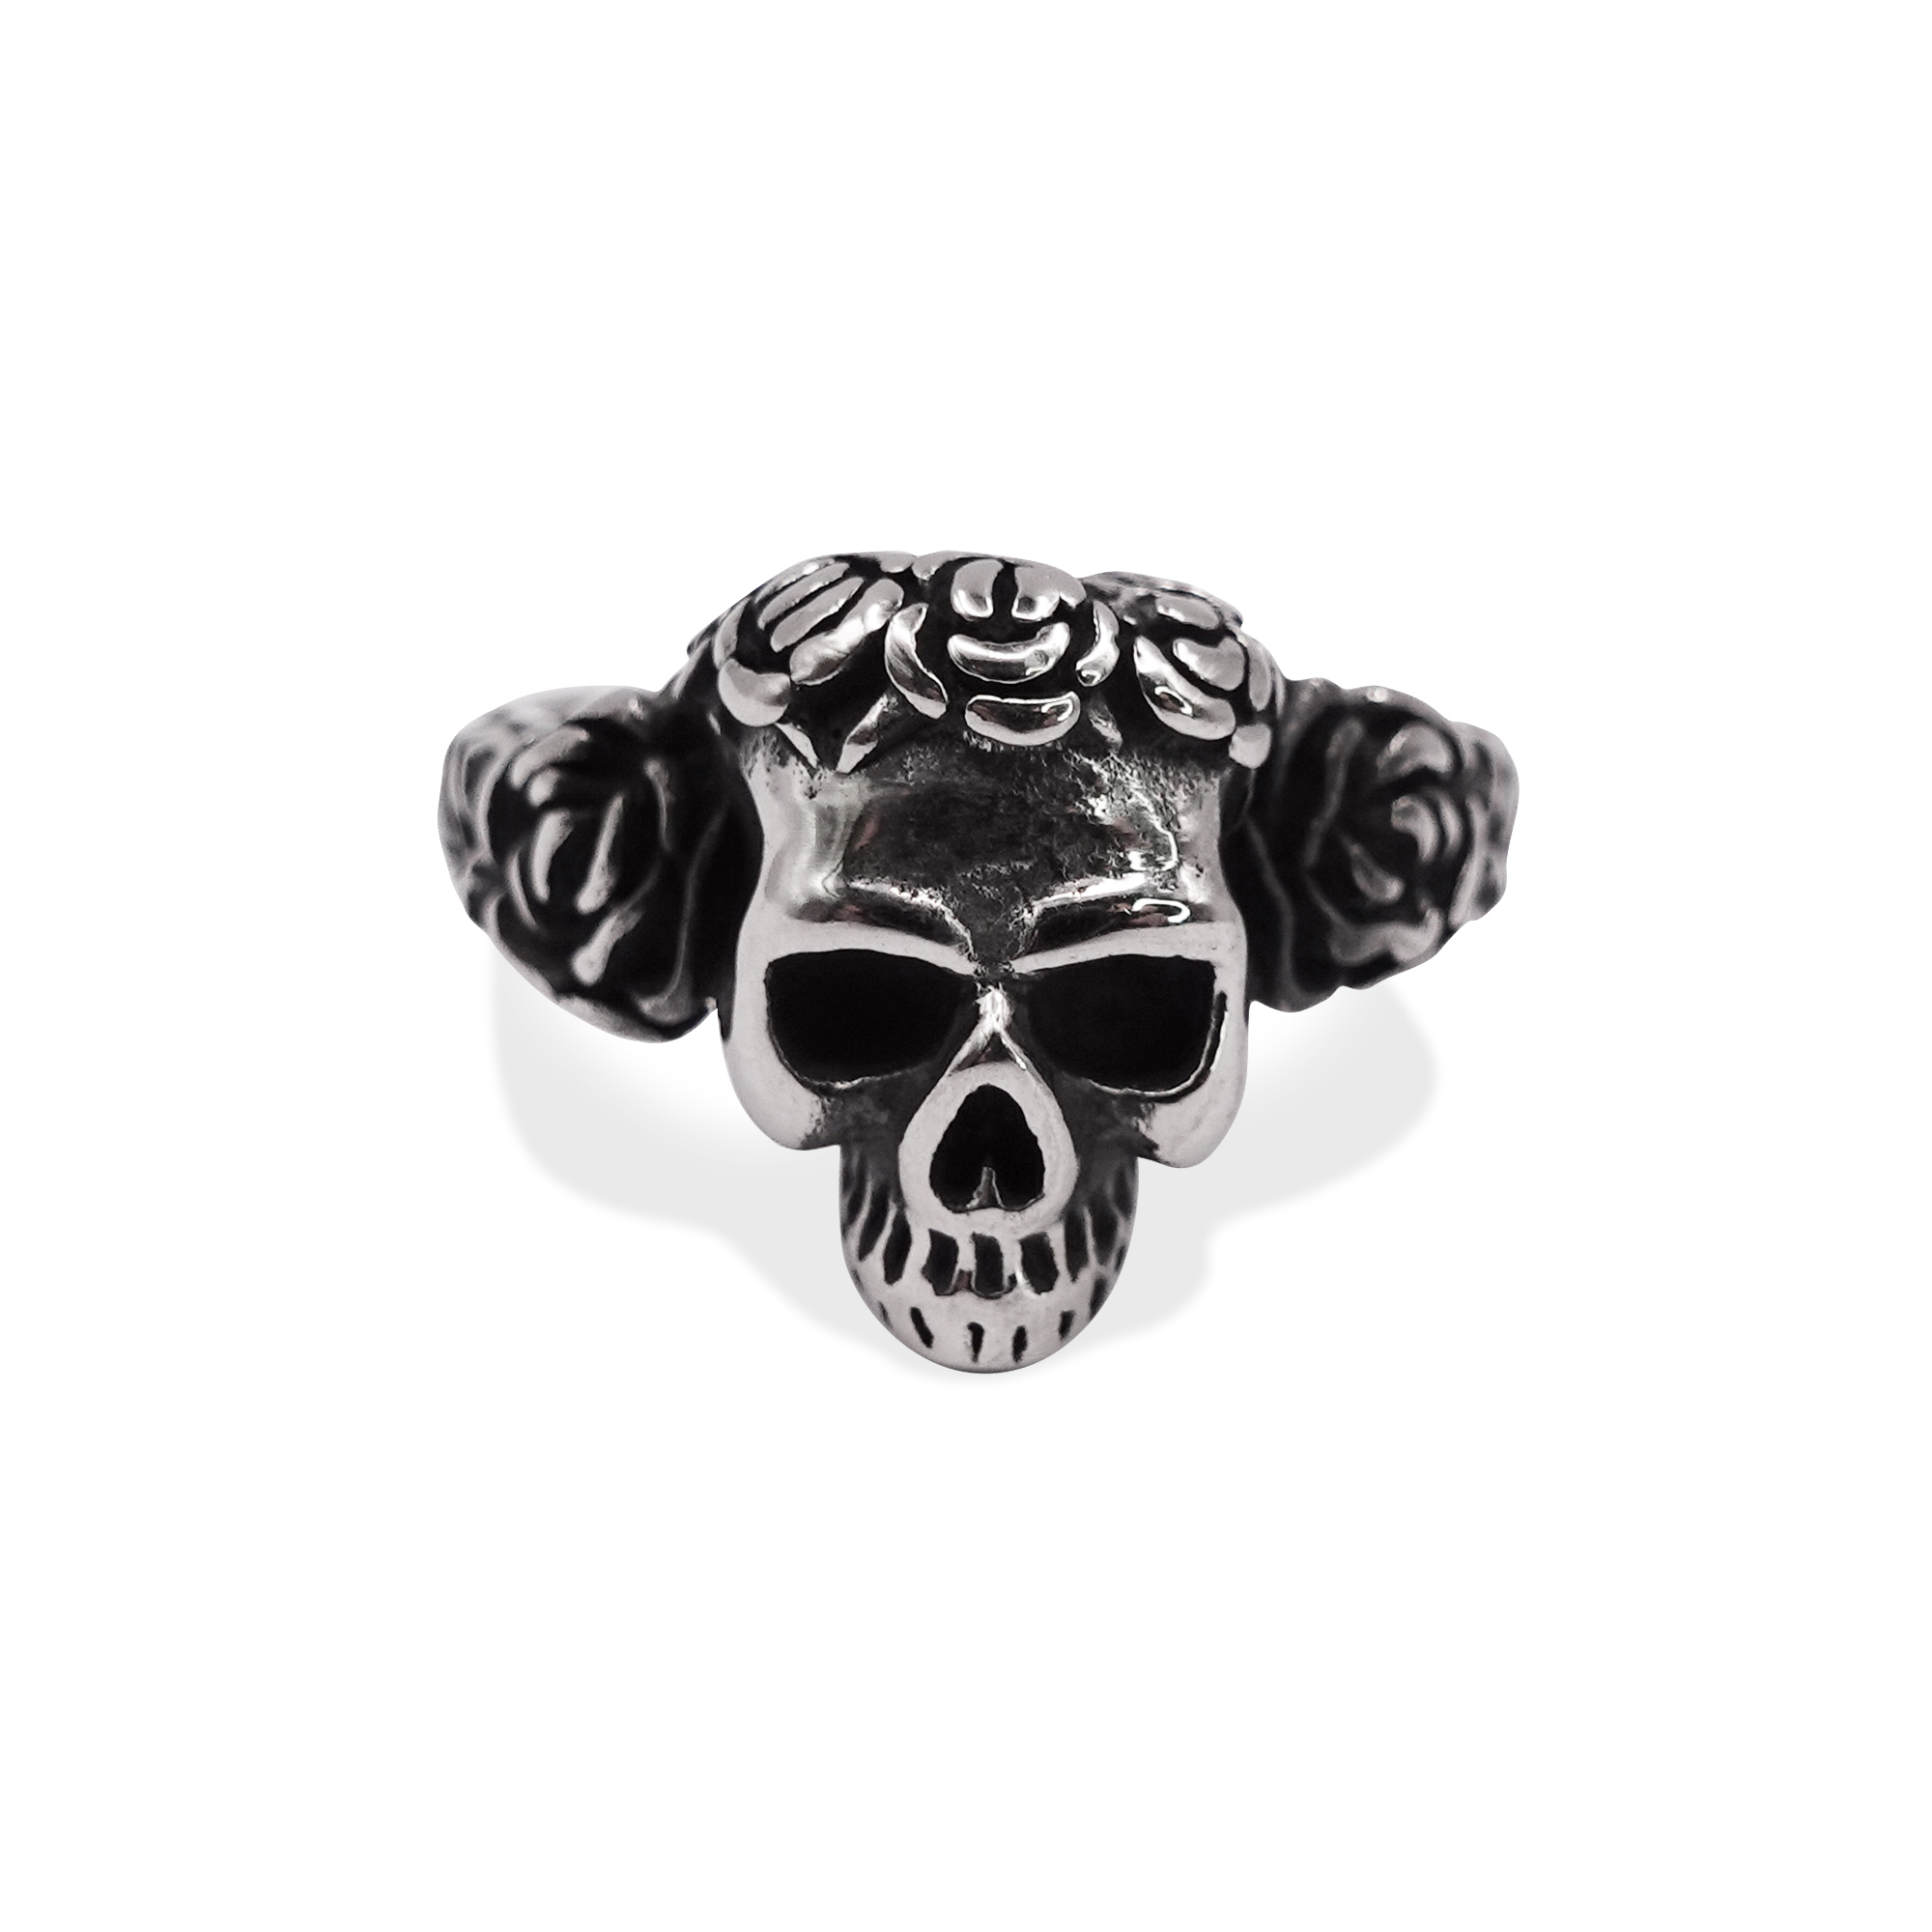 Buy ORAZIO 16Pcs Gothic Open Rings Set for Men Women Punk Adjustable Snake  Dragon Claw Animal Rings Vintage Goth Skull Rings Indie Aesthetic, Alloy,  Cubic Zirconia at Amazon.in